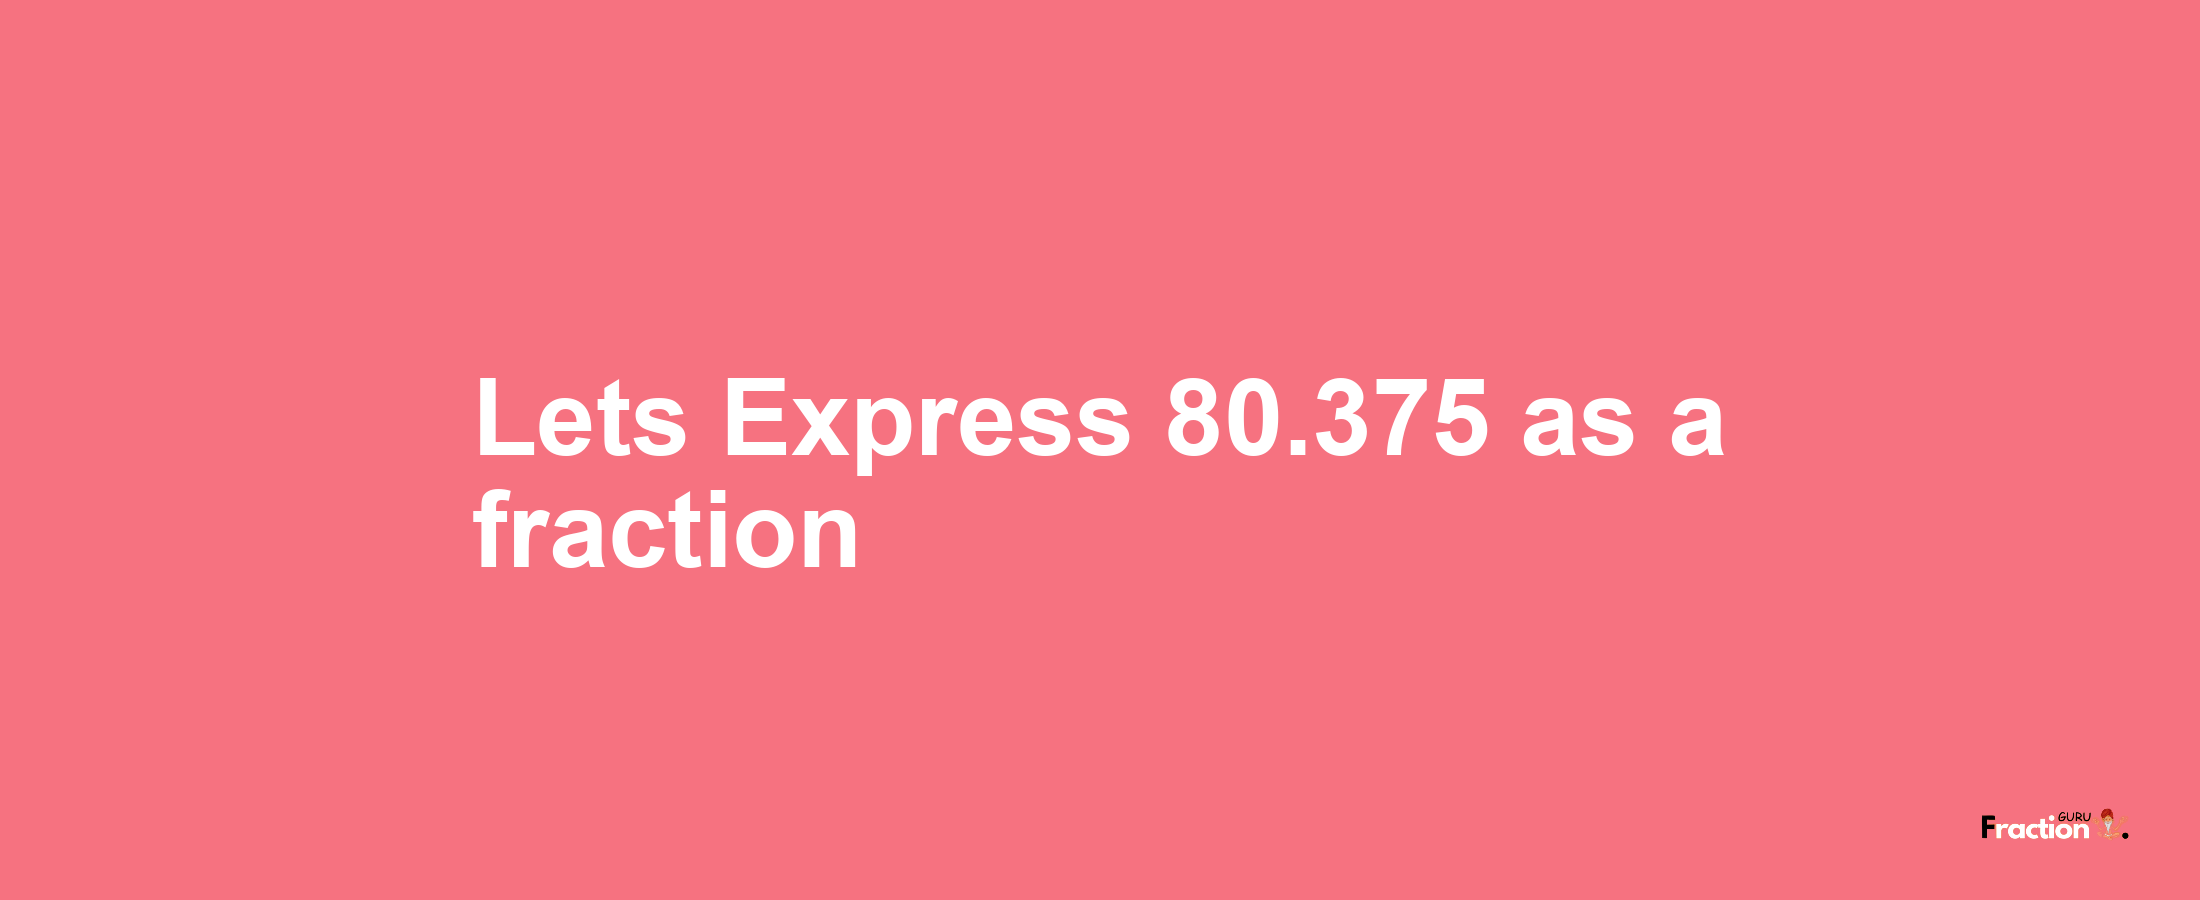 Lets Express 80.375 as afraction